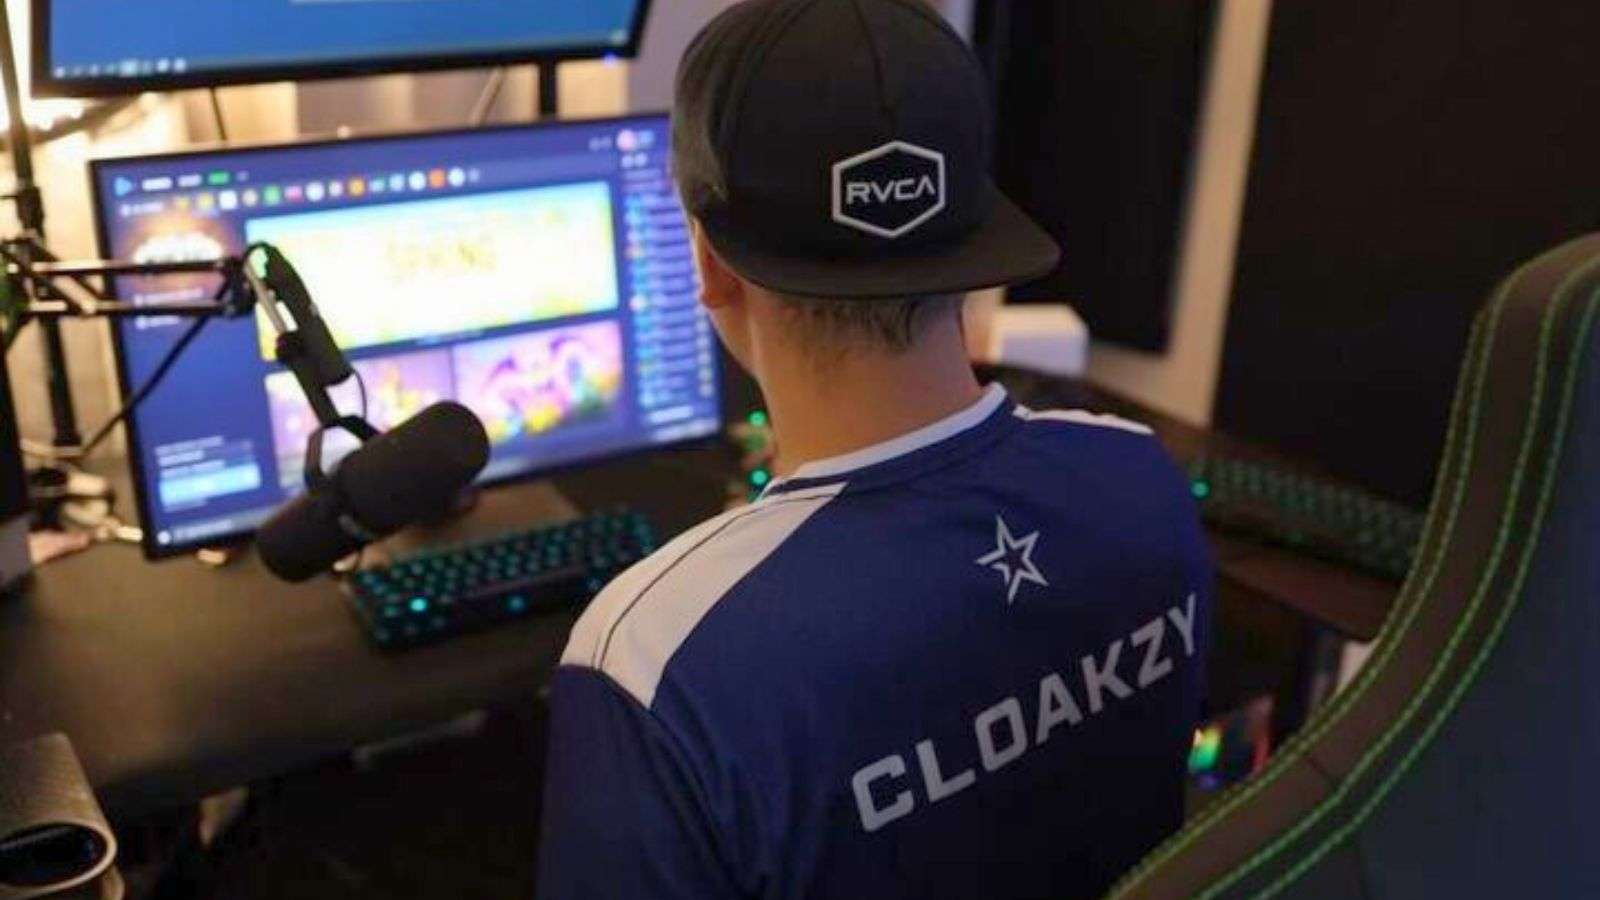 Cloakzy Complexity